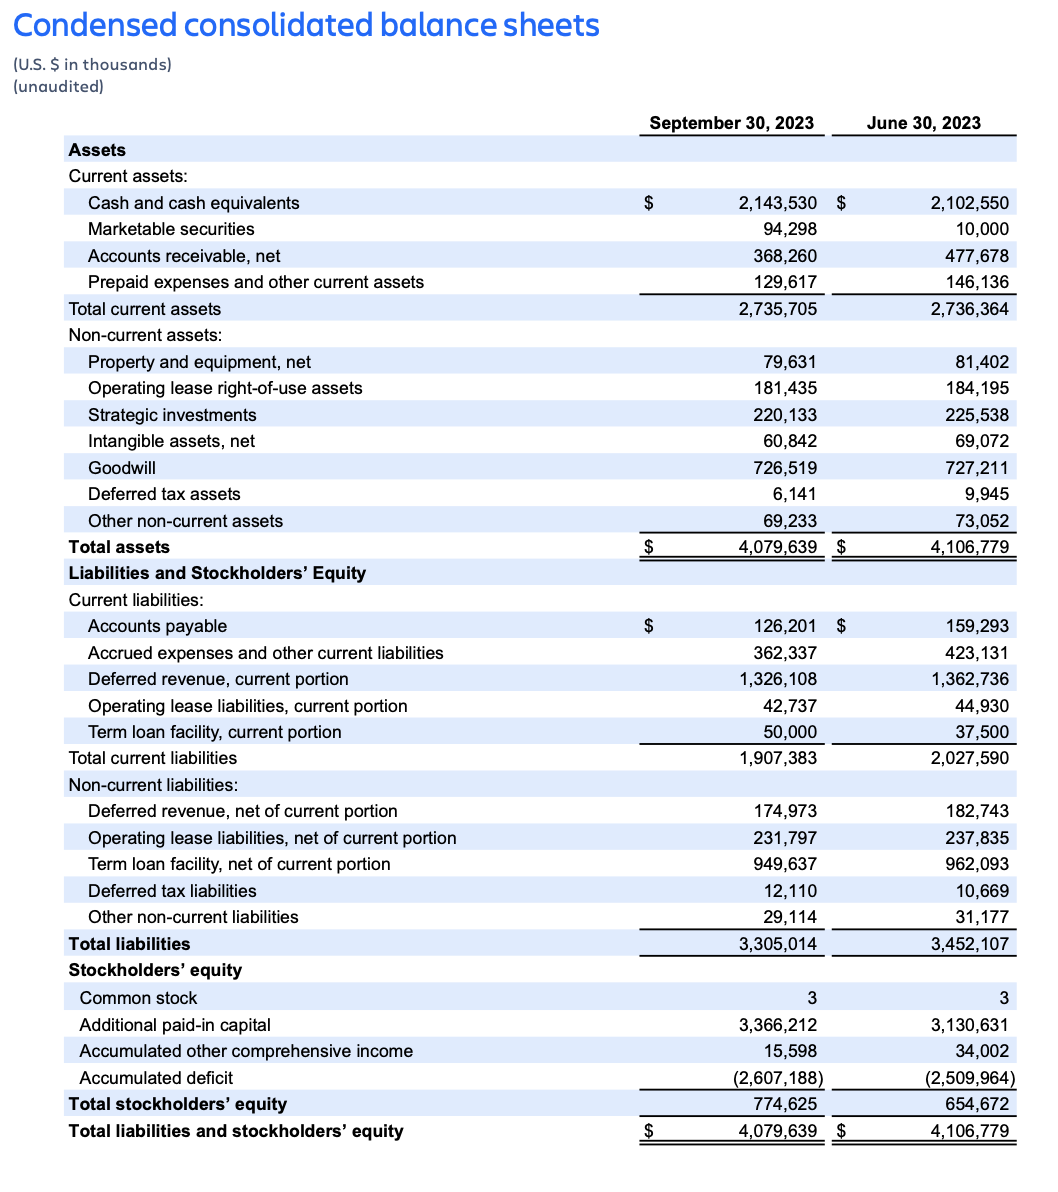 Atlassian Q1 FY24 earnings – condensed consolidated balance sheets